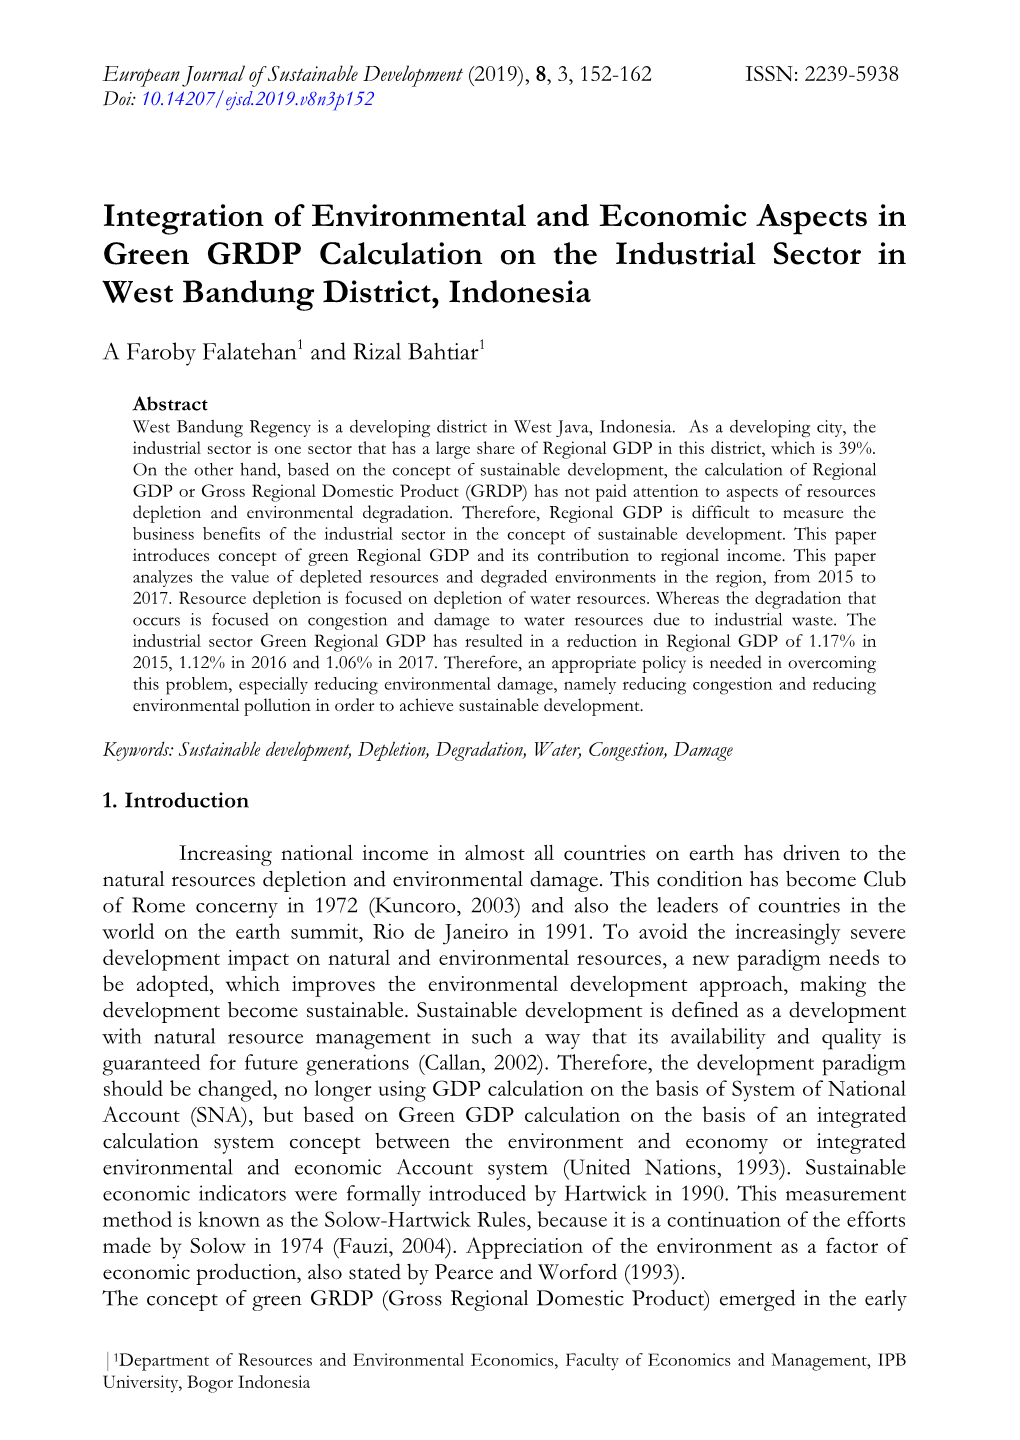 Integration of Environmental and Economic Aspects in Green GRDP Calculation on the Industrial Sector in West Bandung District, Indonesia